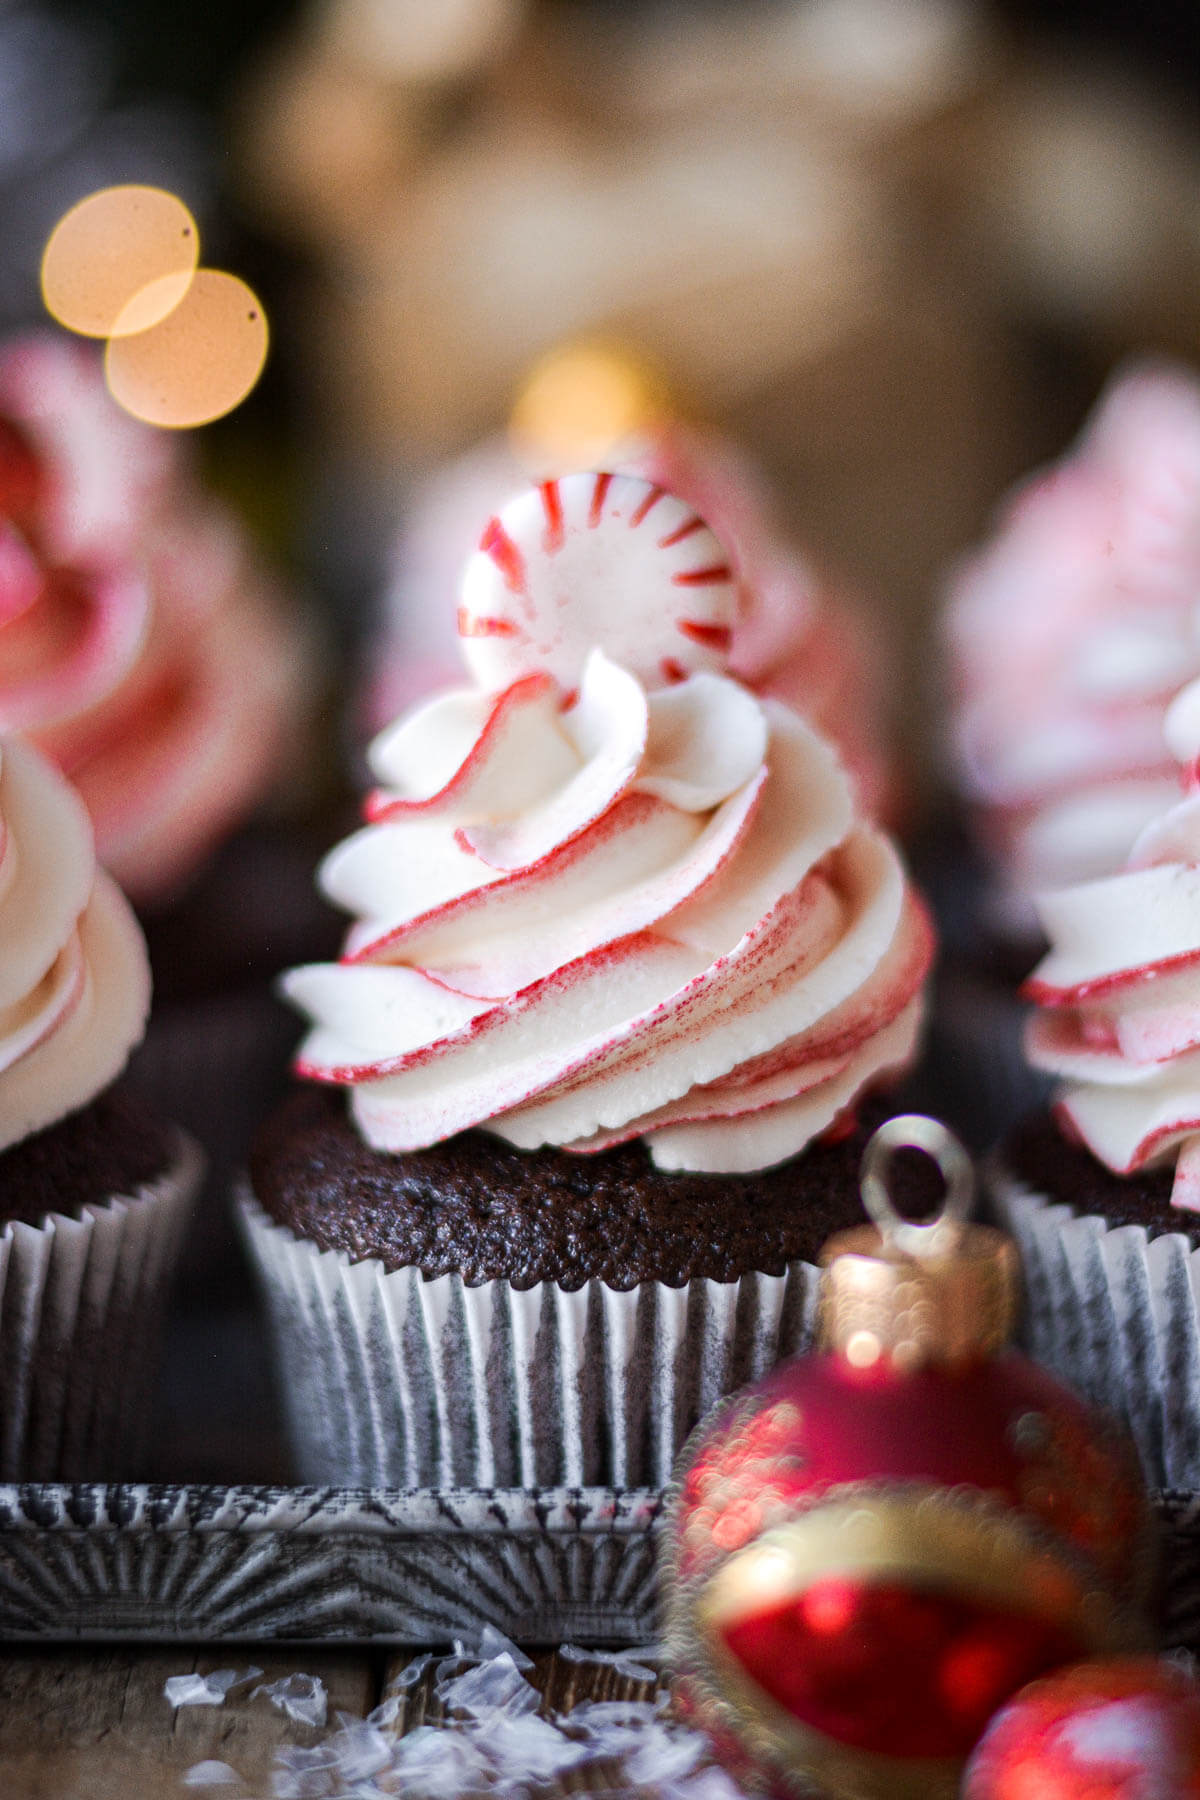 Red and white swirled peppermint buttercream on a chocolate cupcake, topped with a peppermint candy.